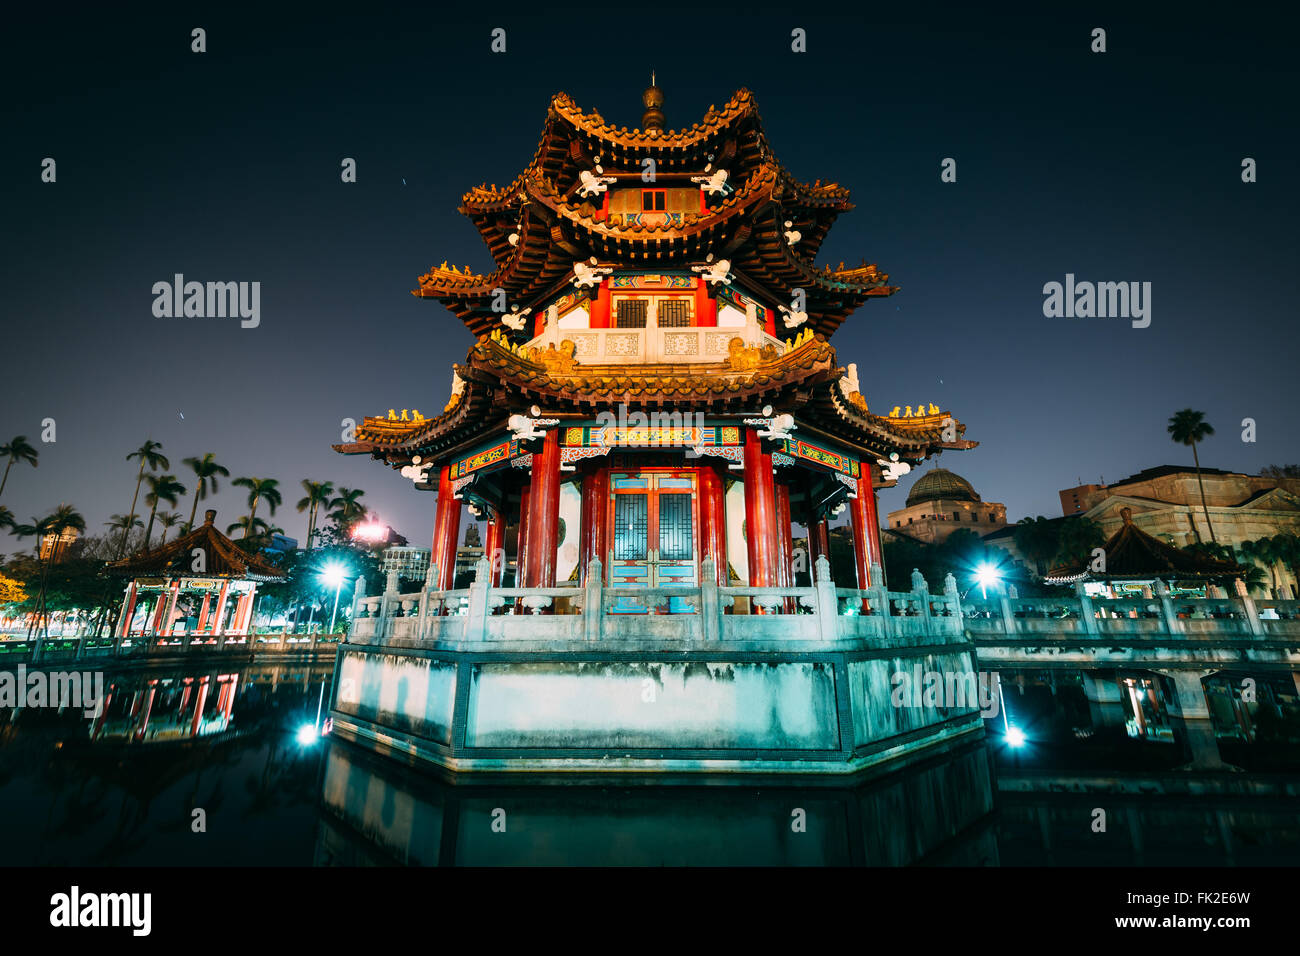 Traditional Chinese building and pond at night, at 2/28 Peace Park, in Taipei, Taiwan. Stock Photo